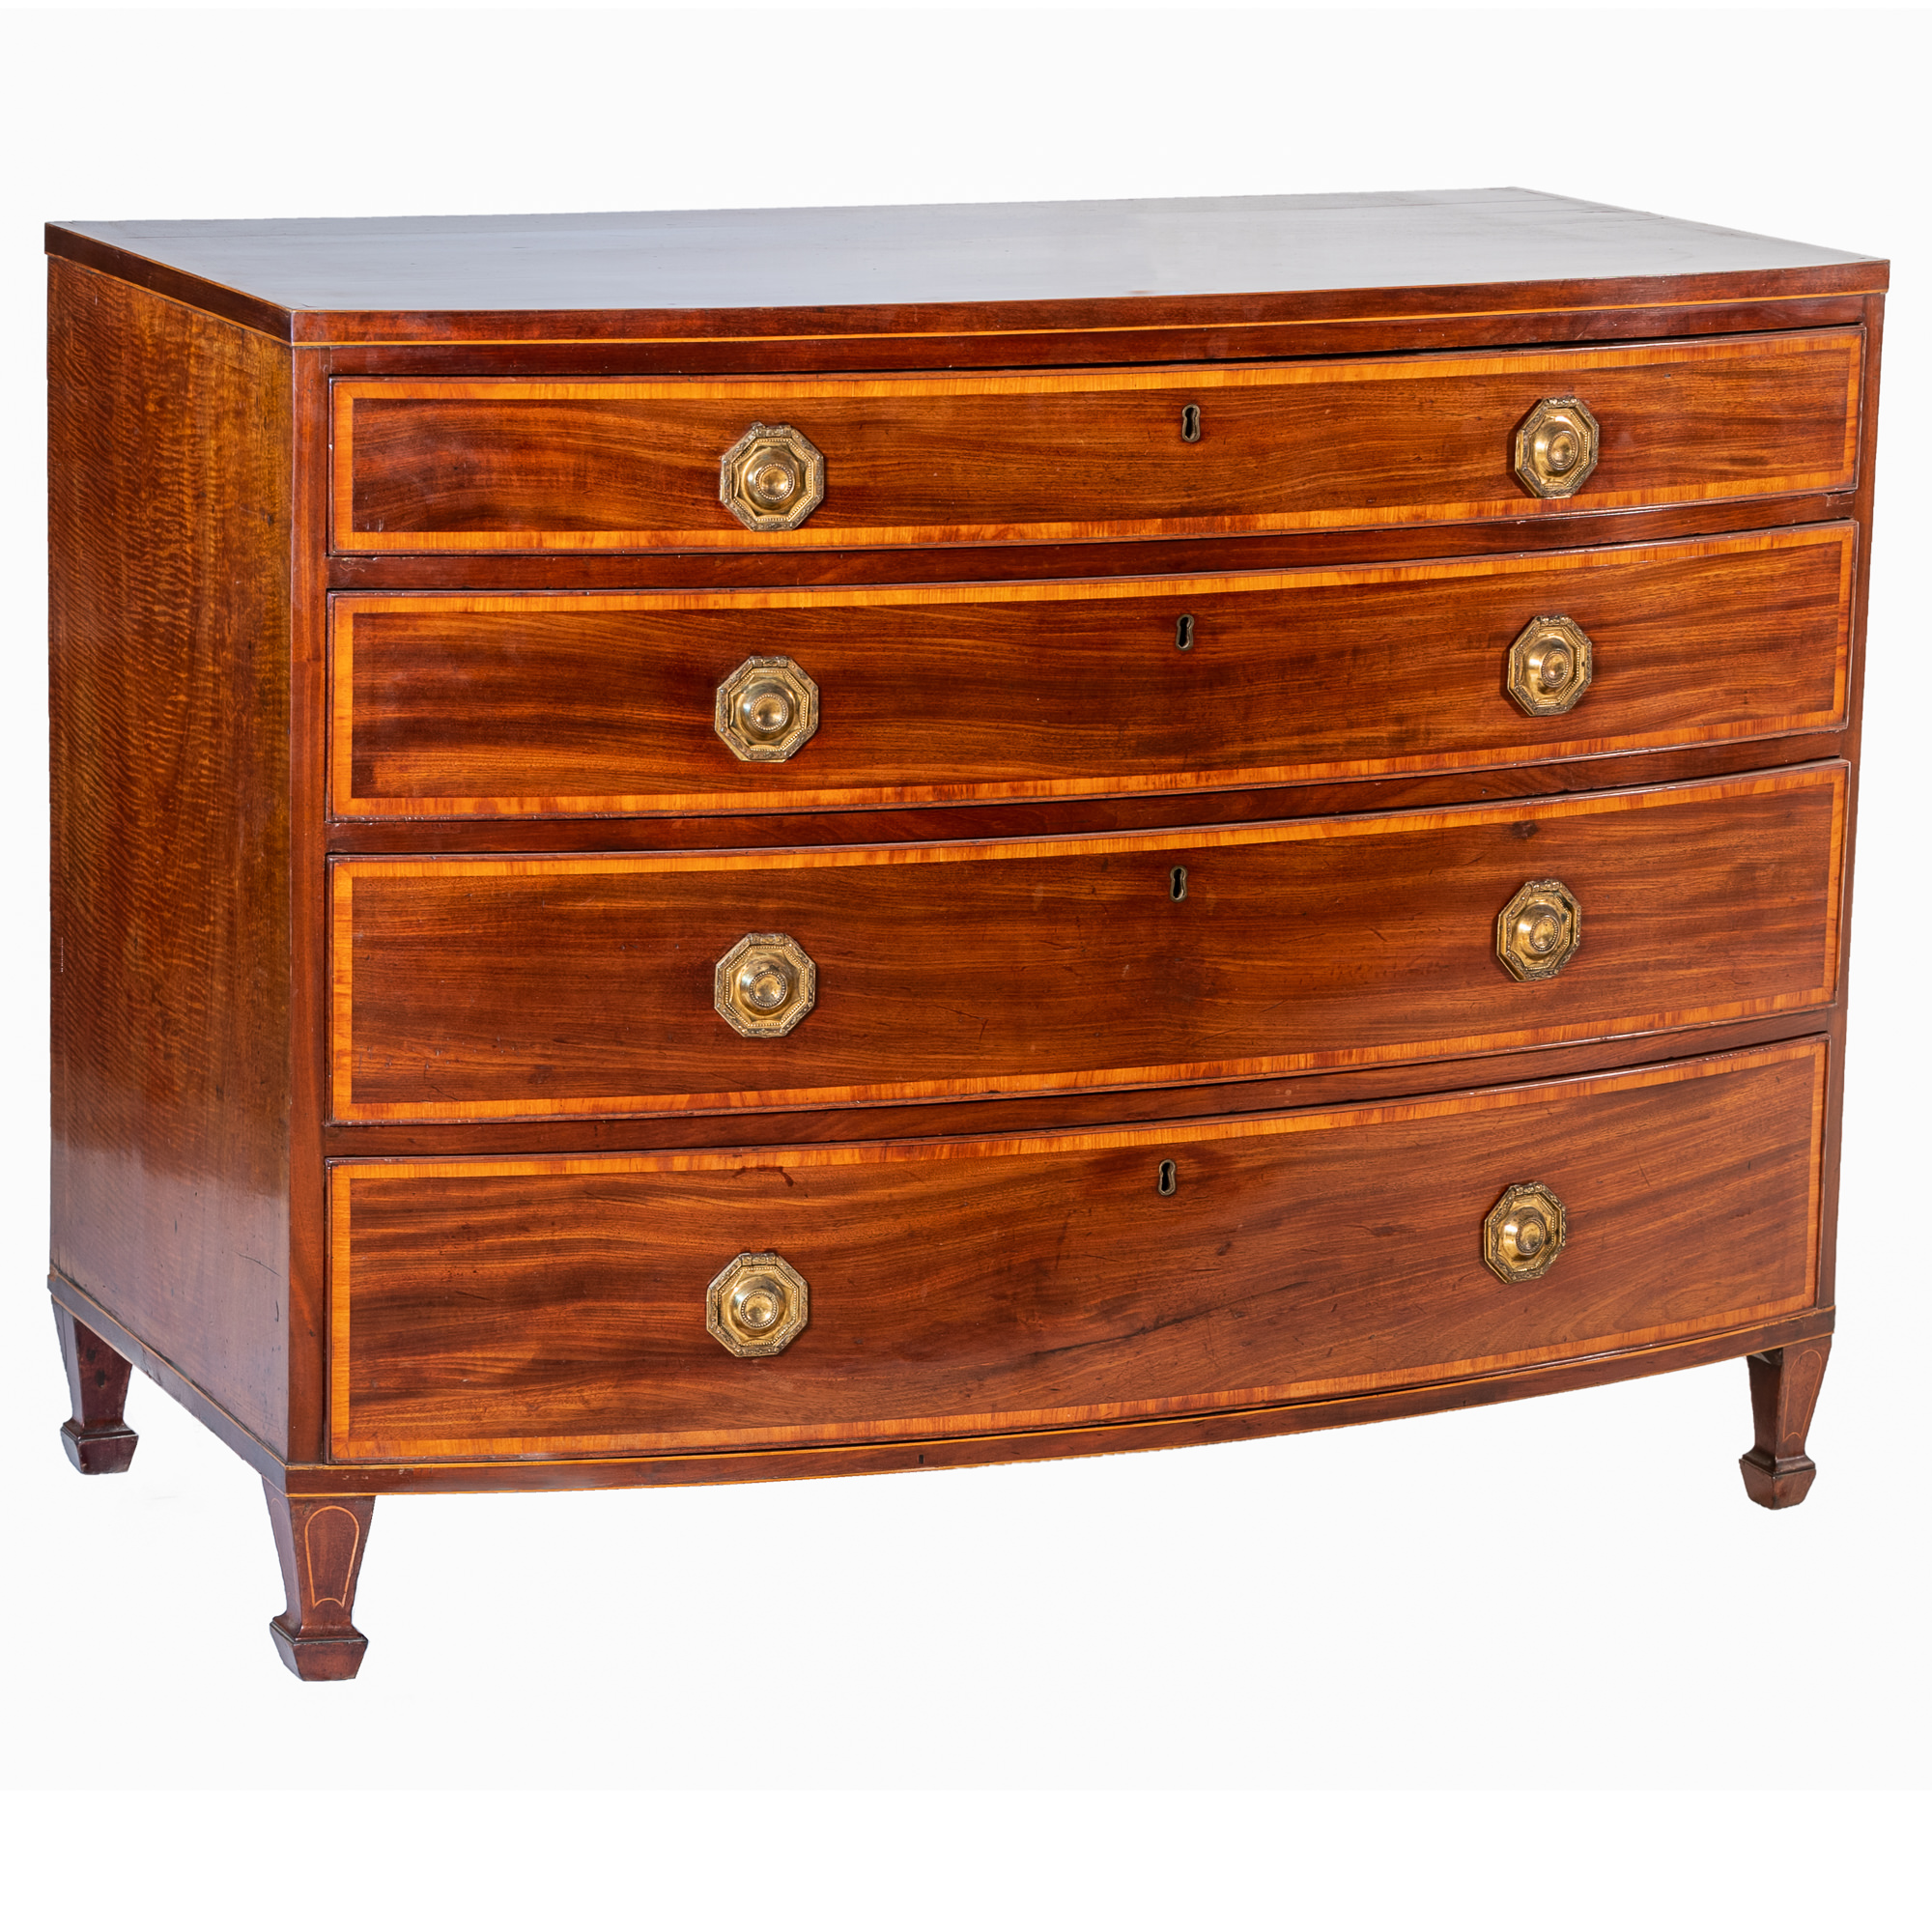 'George III Bowfront Mahogany and Satinwood Crossbanded Chest of Drawers Circa 1810'